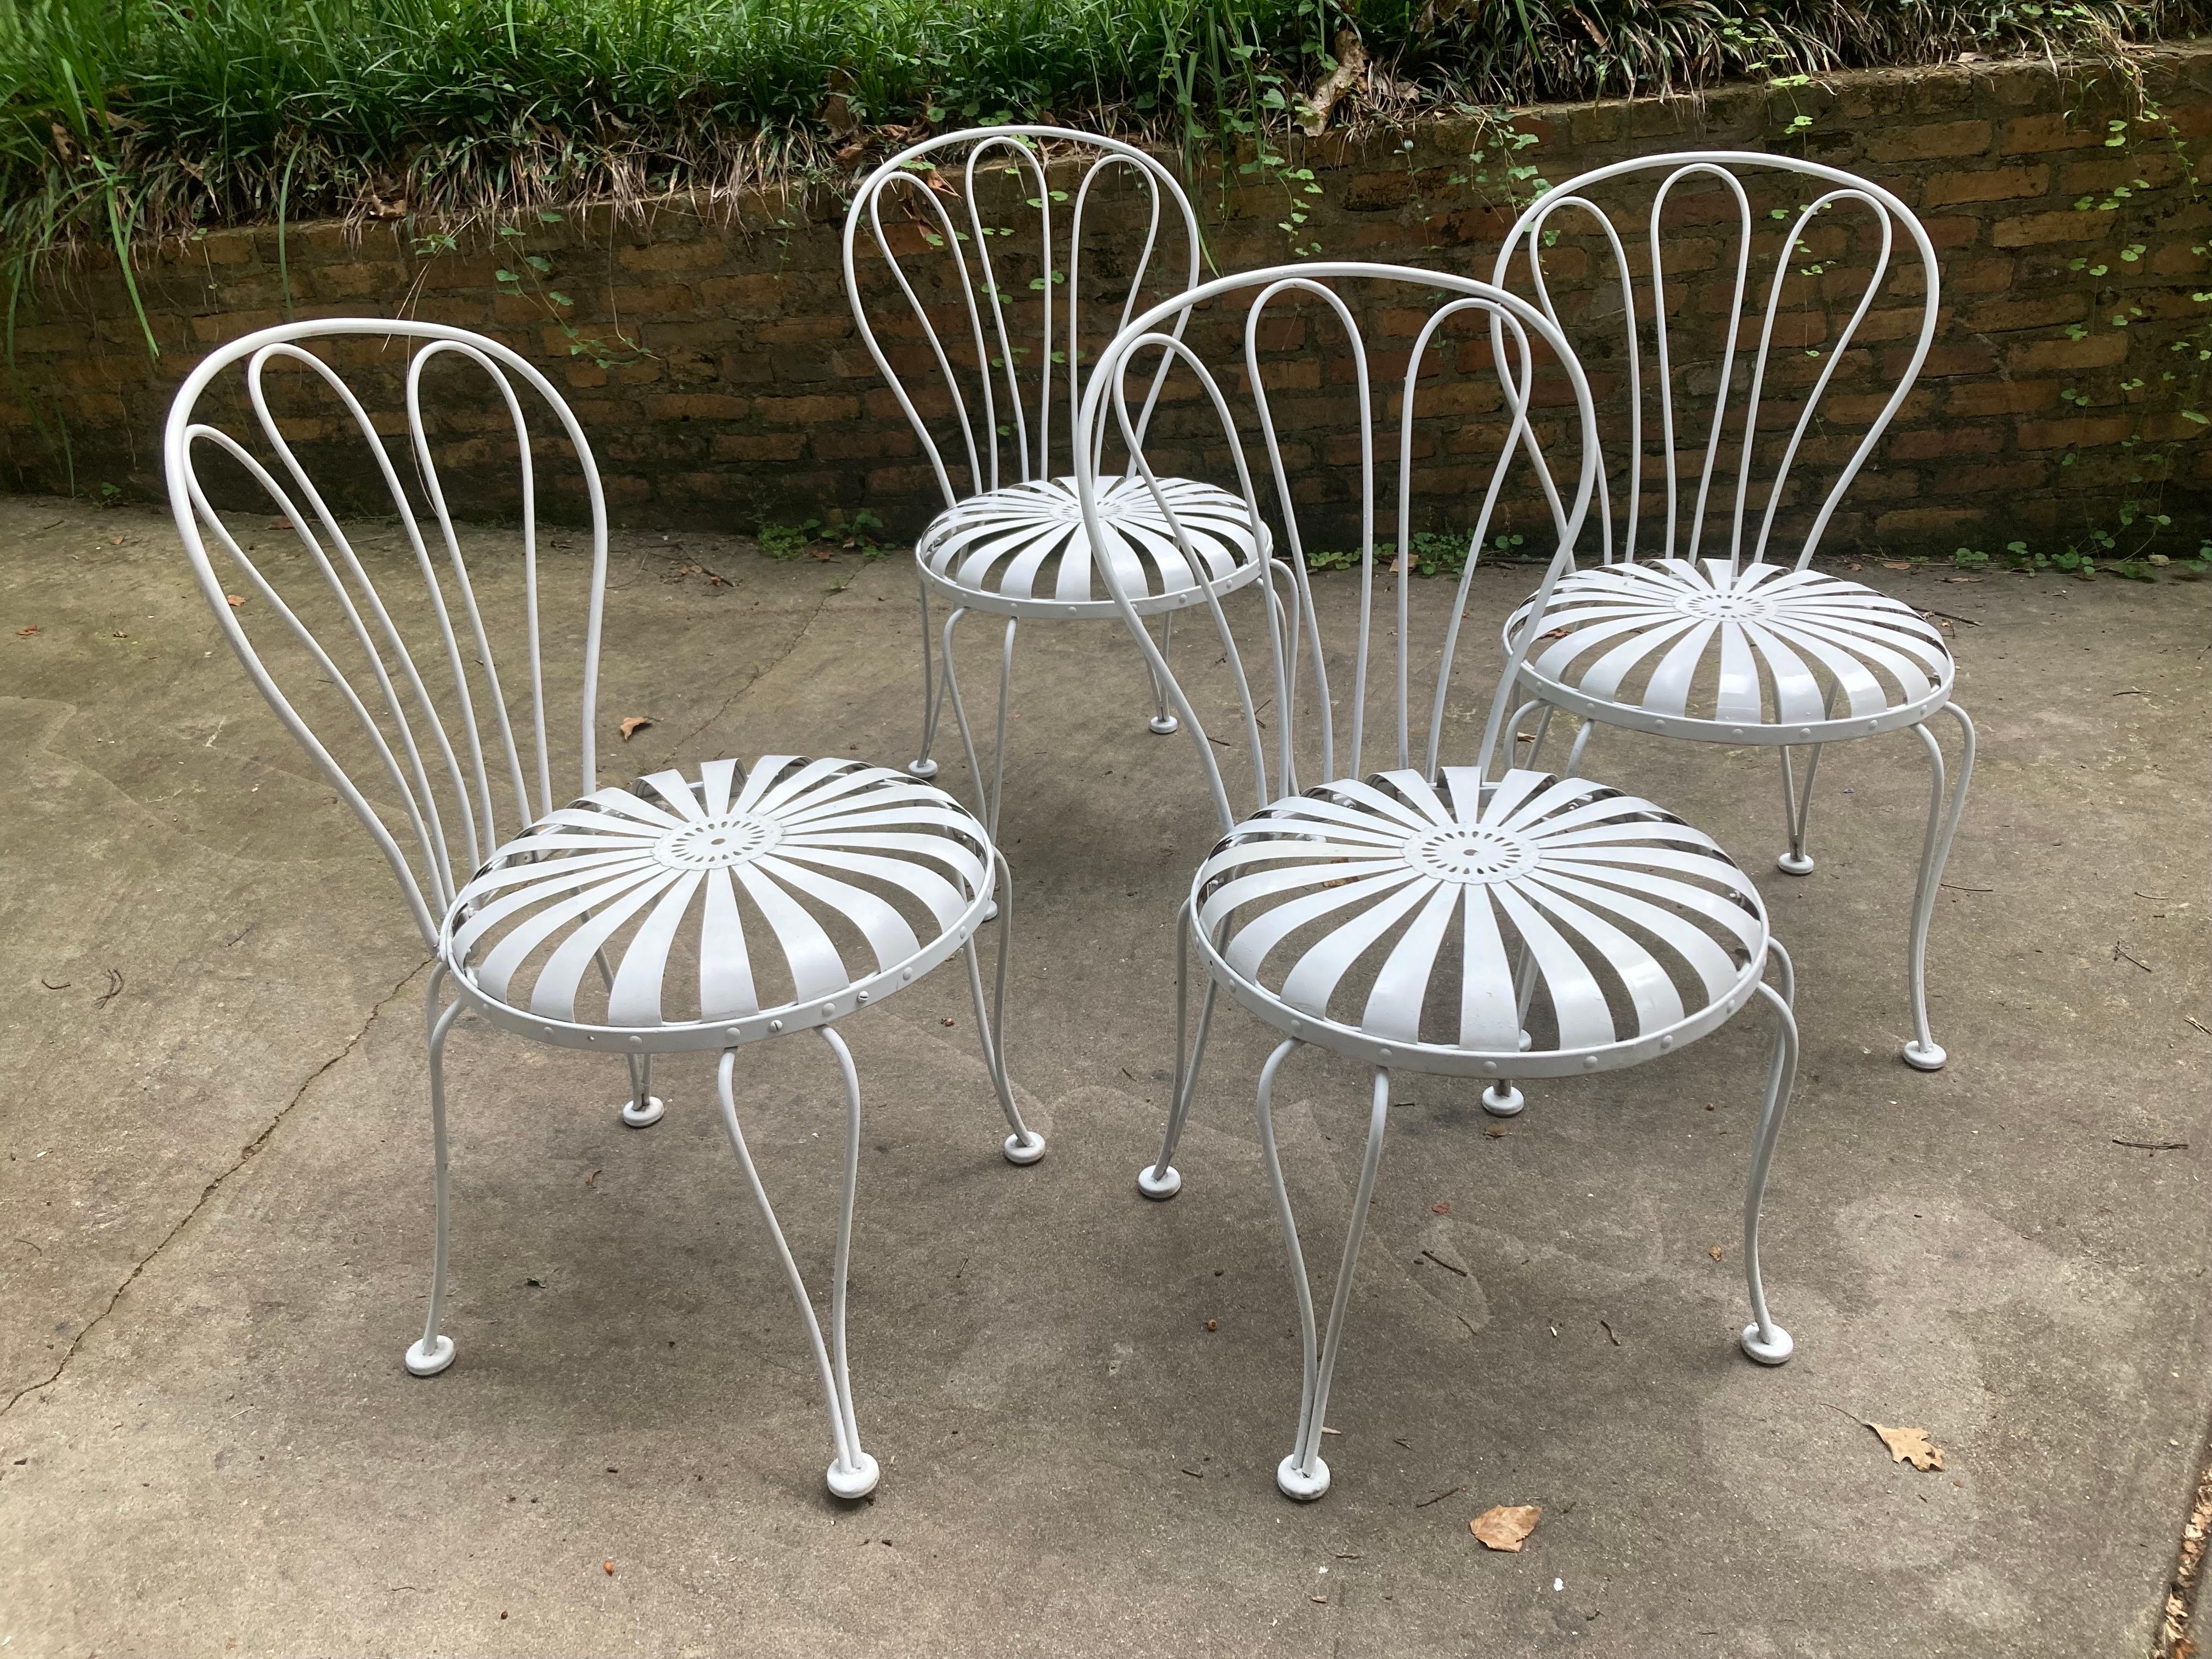 in impeccable condition, recently sandblasted and professionally painted. should do well inside or out of doors… sold as a set. shipping from athens, ga
22ʺW × 23ʺD × 34ʺH